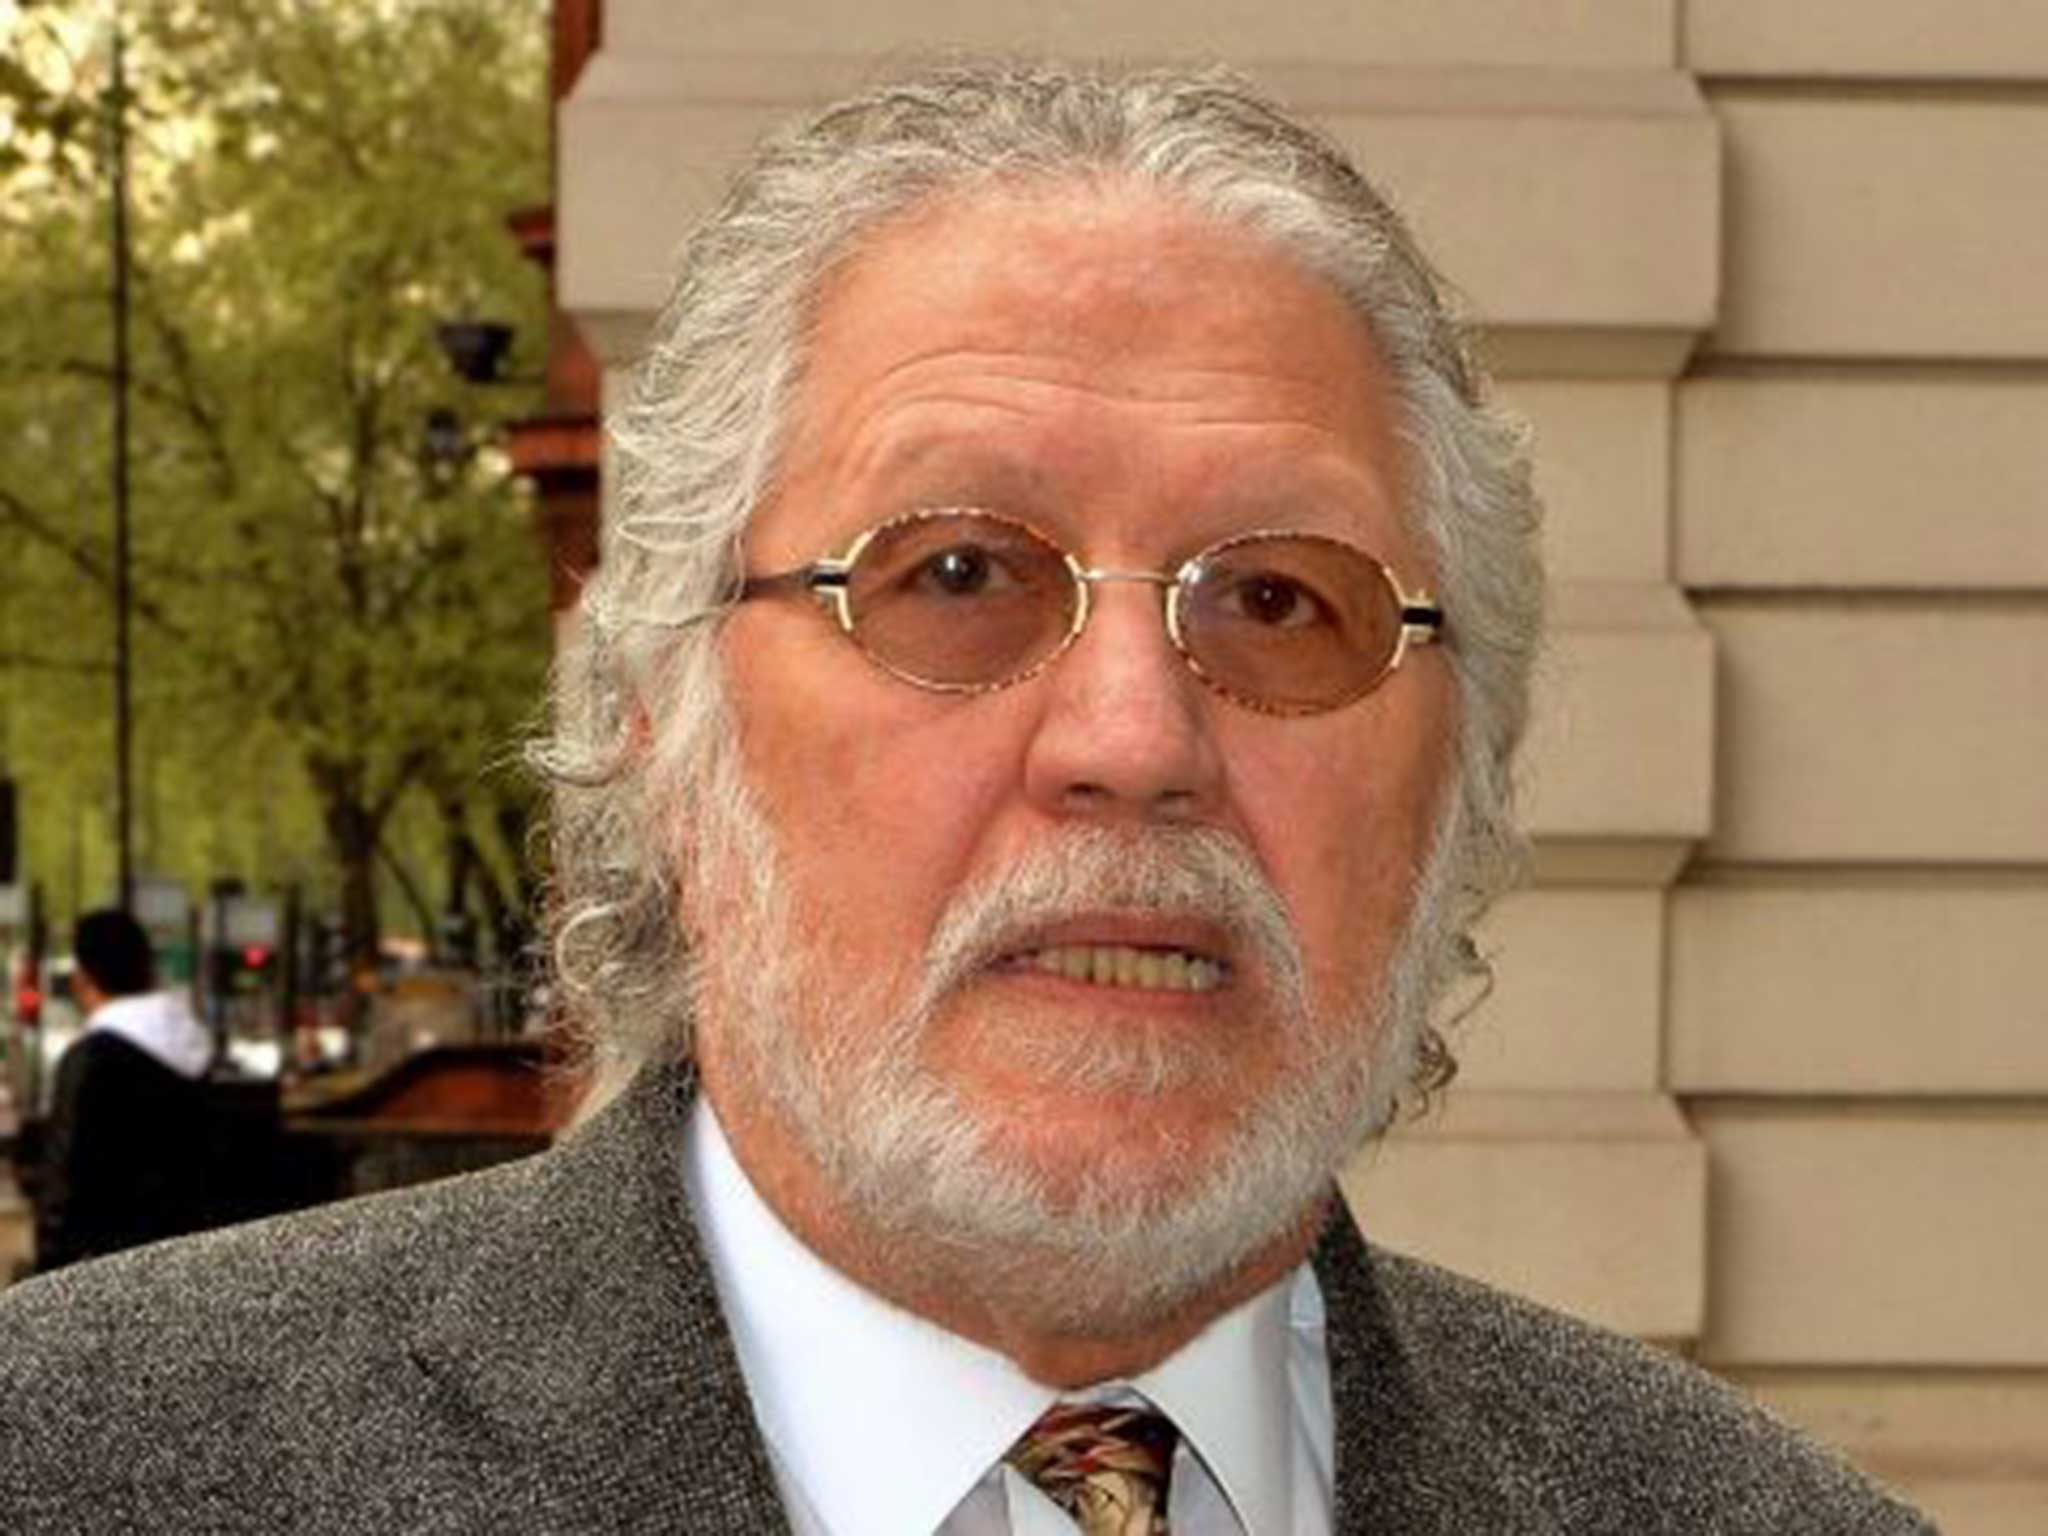 DJ Dave Lee Travis' three-month suspended sentence for indecent assault will not be referred to the Court of Appeal